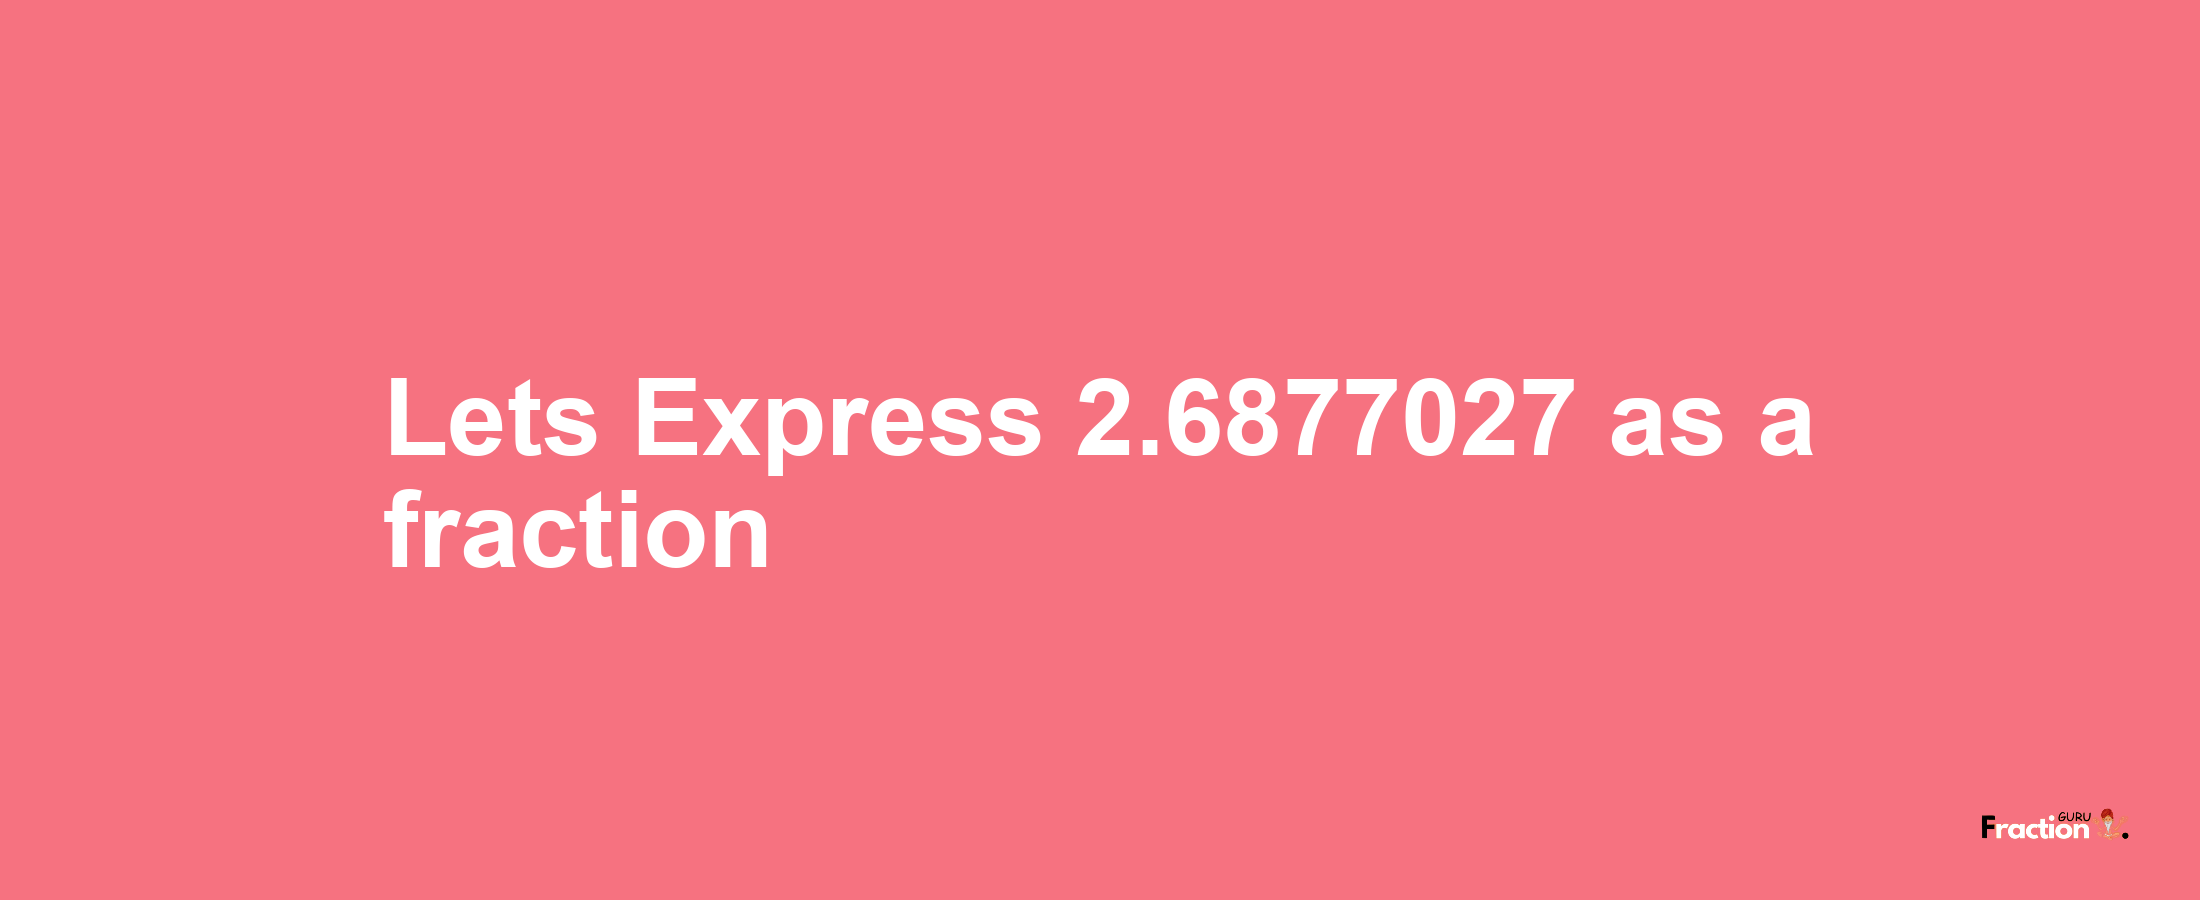 Lets Express 2.6877027 as afraction